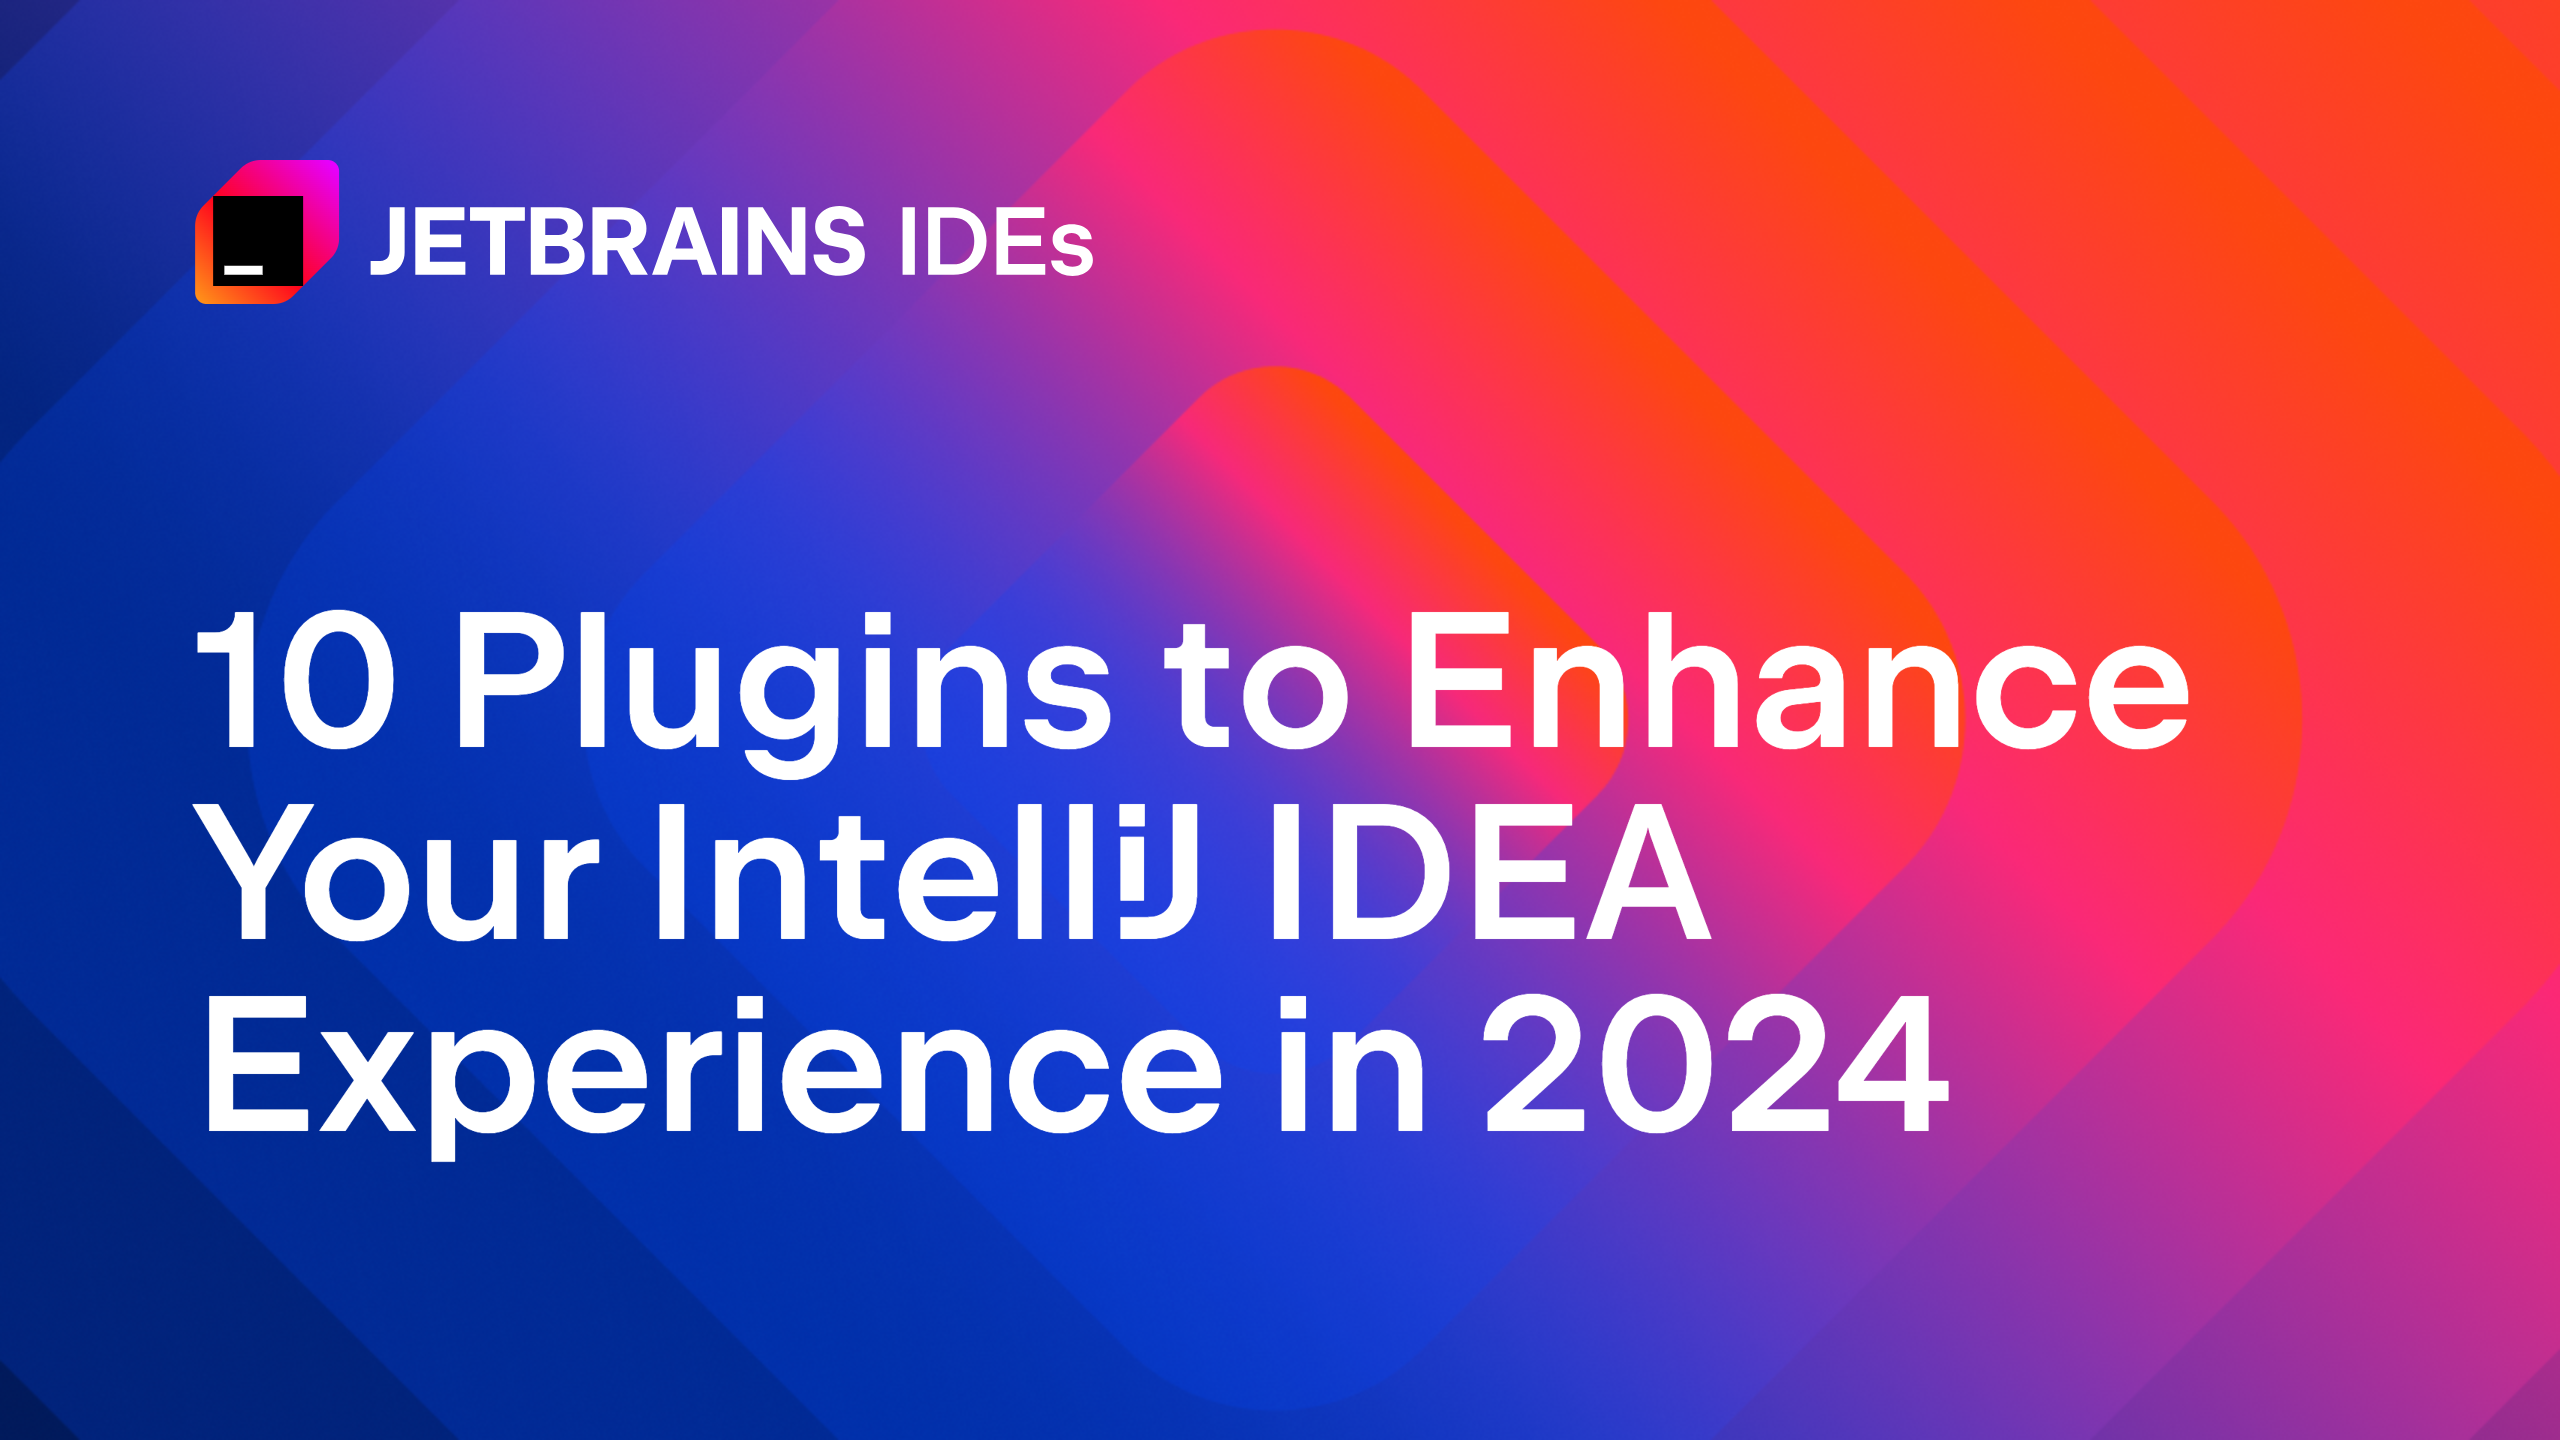 10 Plugins to Enhance Your IntelliJ IDEA Experience in 2024 [Video]